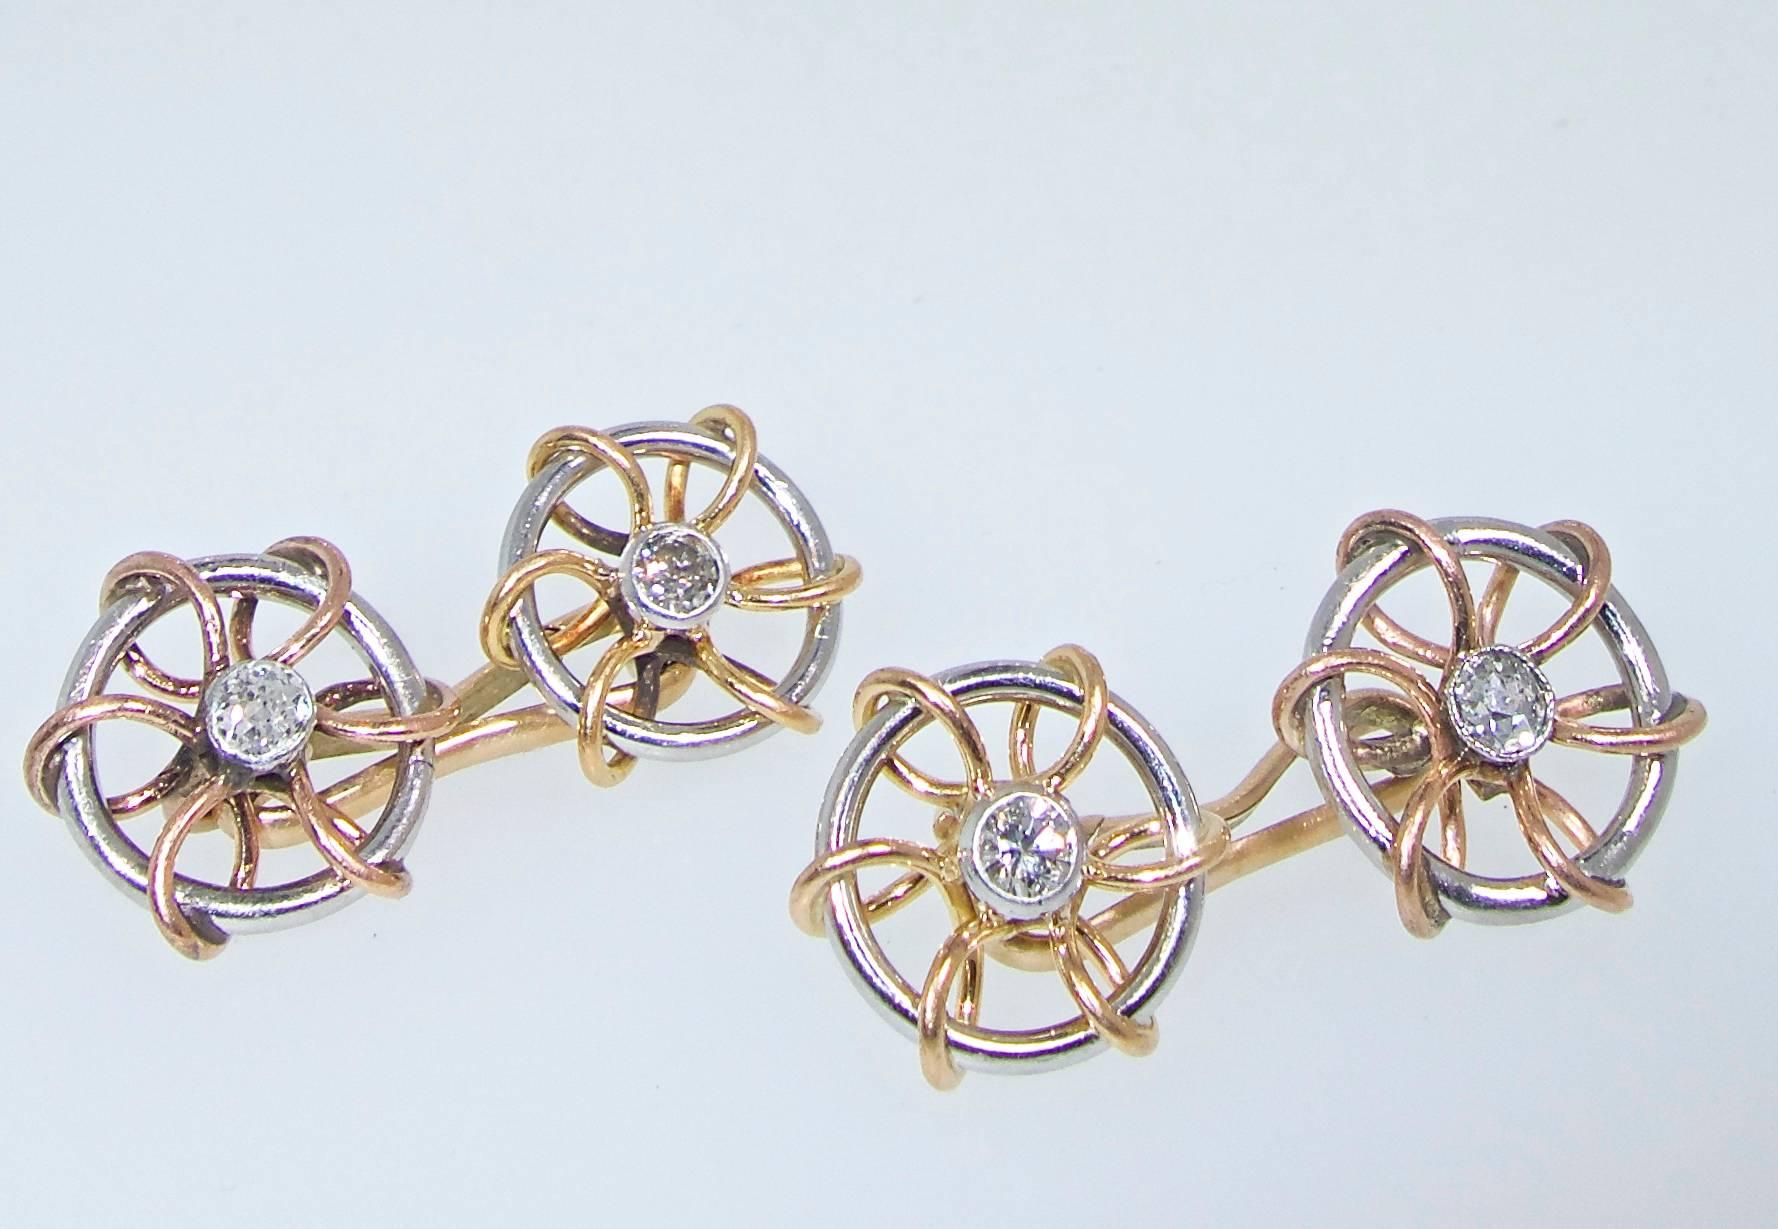 Centering a fine, white,  older cut,  diamond, TW .35 cts., approximately, these cufflinks are an usual circular design with pink, white and yellow gold.  With Austrian hallmarks, circa 1920.

Pierre/Famille, foremost in the acquisition and sale of